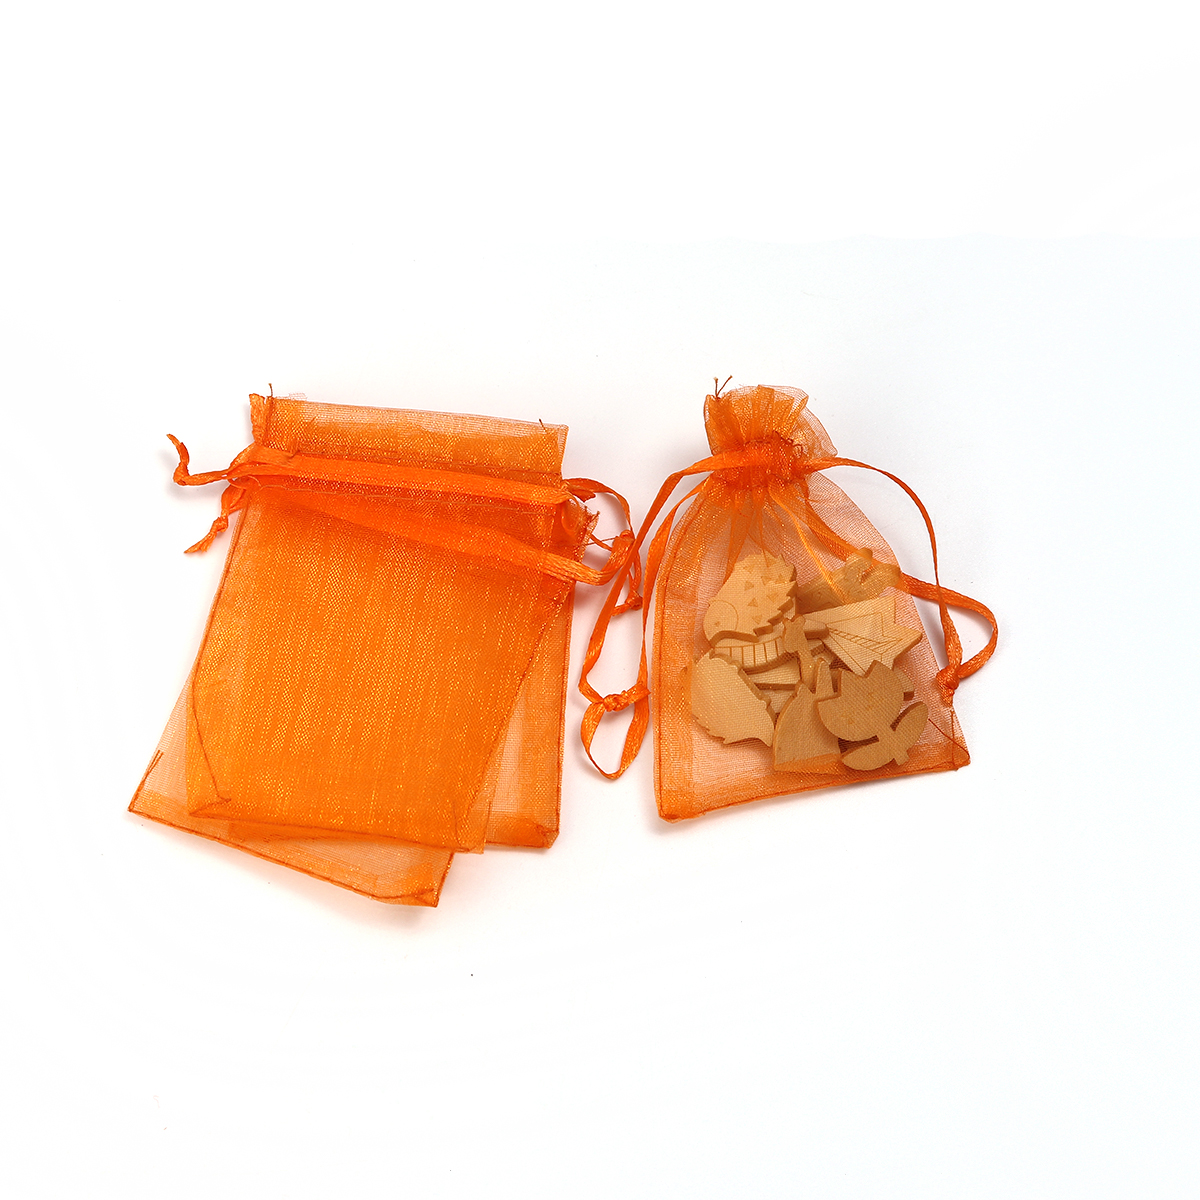 Picture of Wedding Gift Organza Jewelry Bags Drawstring Rectangle Orange (Usable Space: 7x7cm) 9cm(3 4/8") x 7cm(2 6/8"), 50 PCs